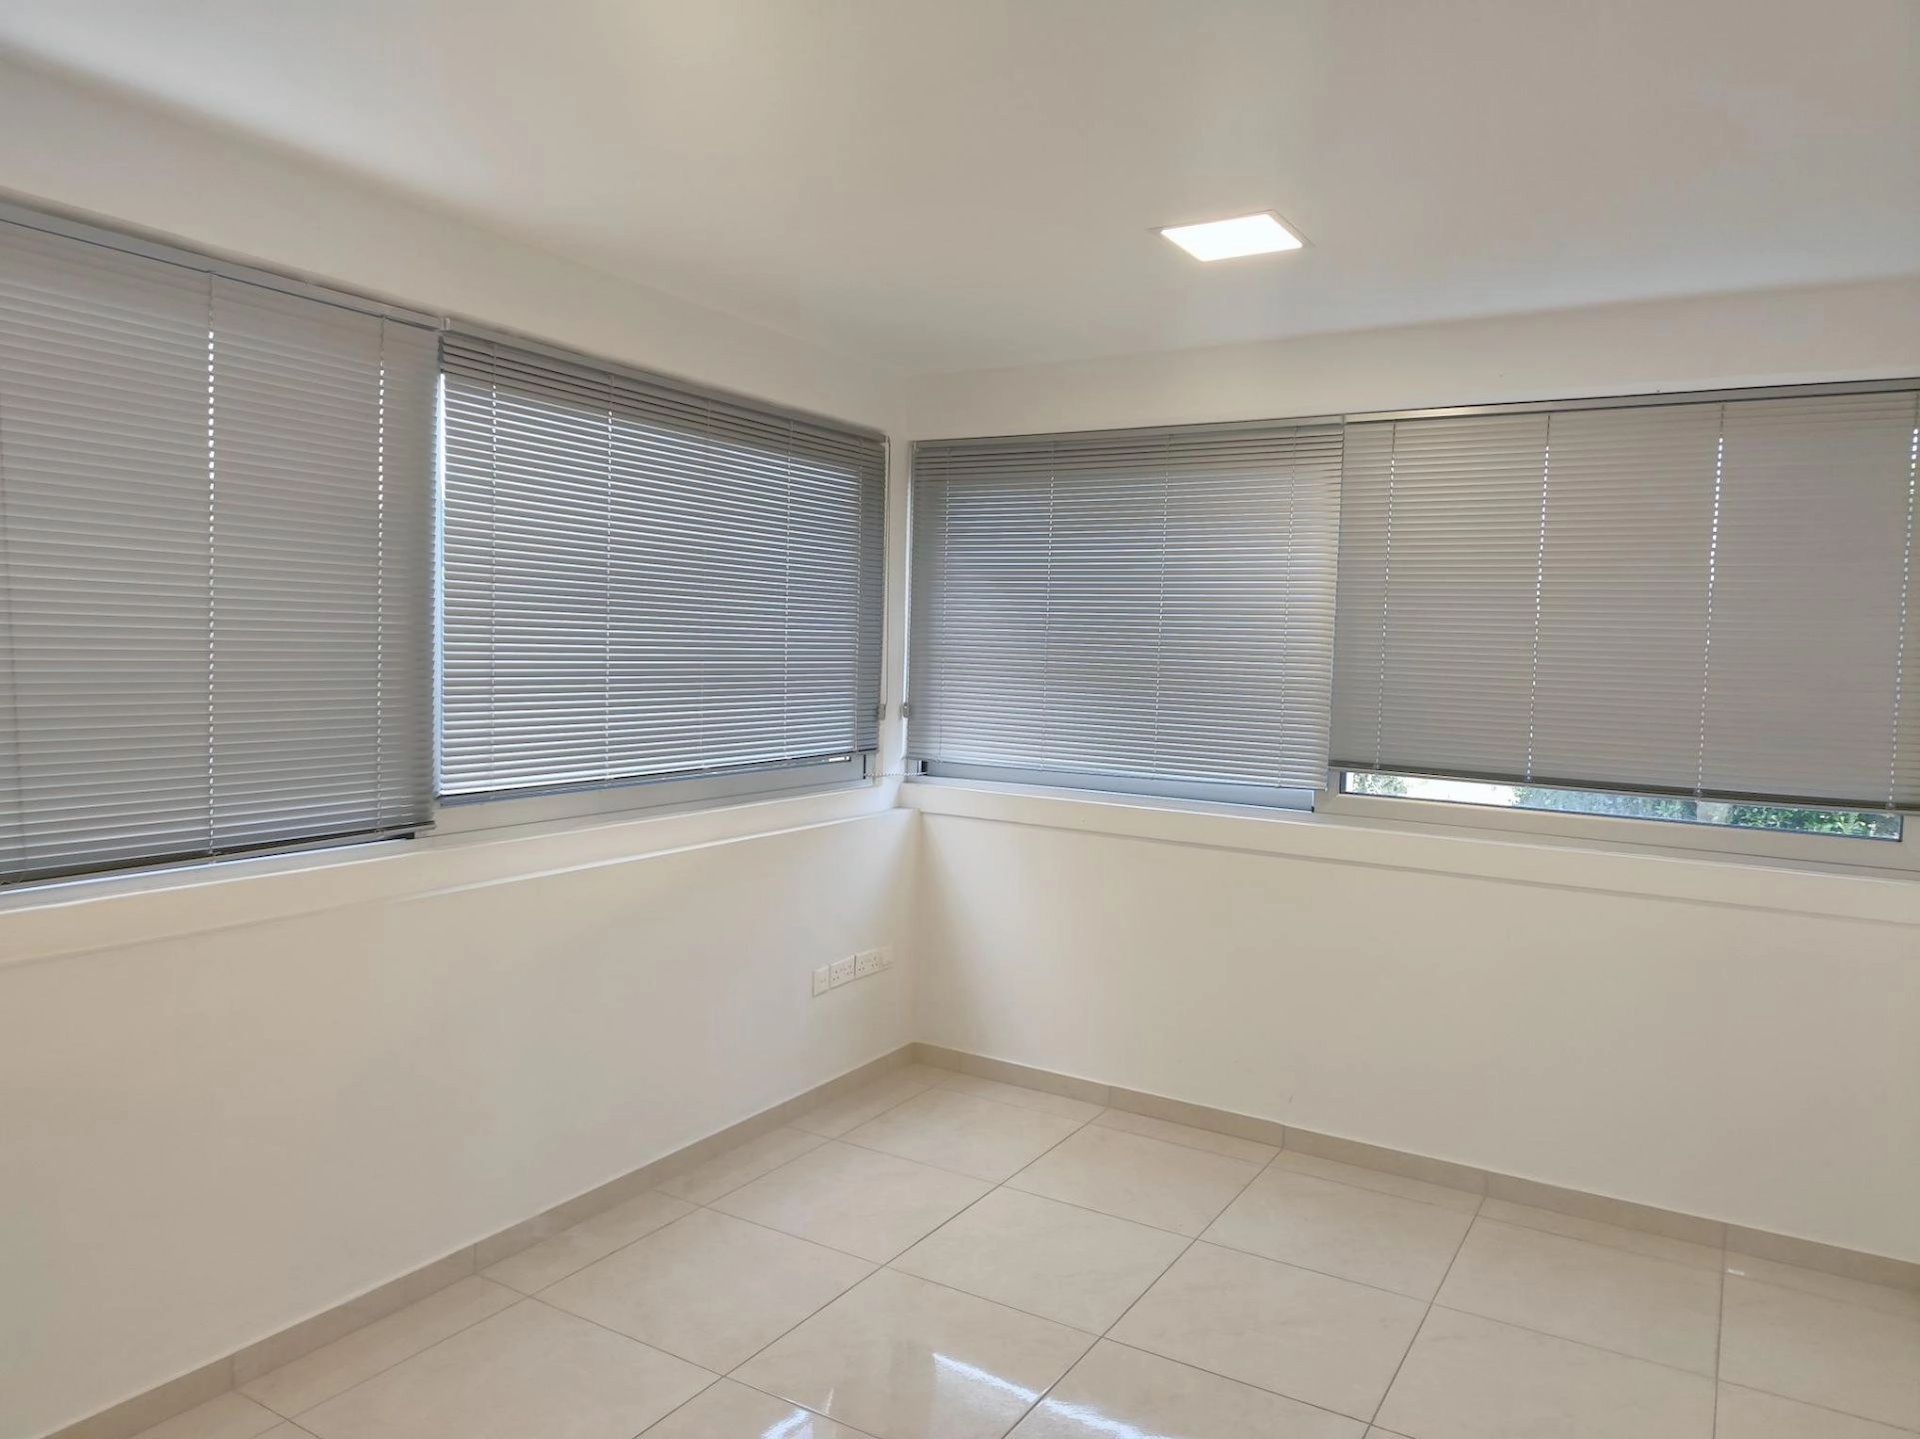 74m² Office for Rent in Limassol – Agia Zoni